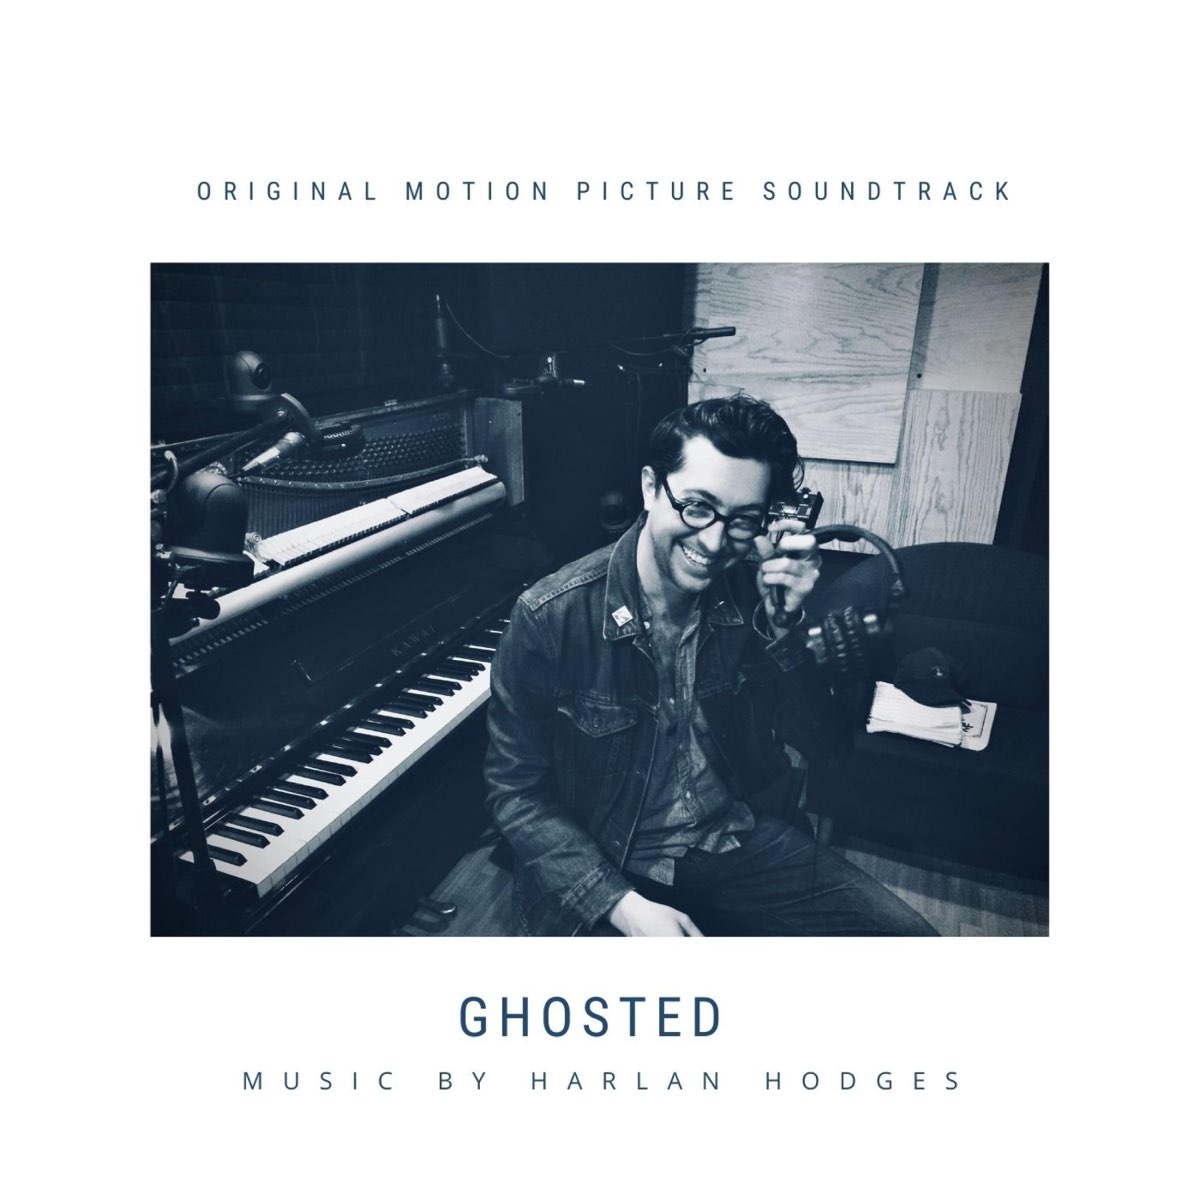 ‎Ghosted (Original Motion Picture Soundtrack) by Harlan Hodges on Apple